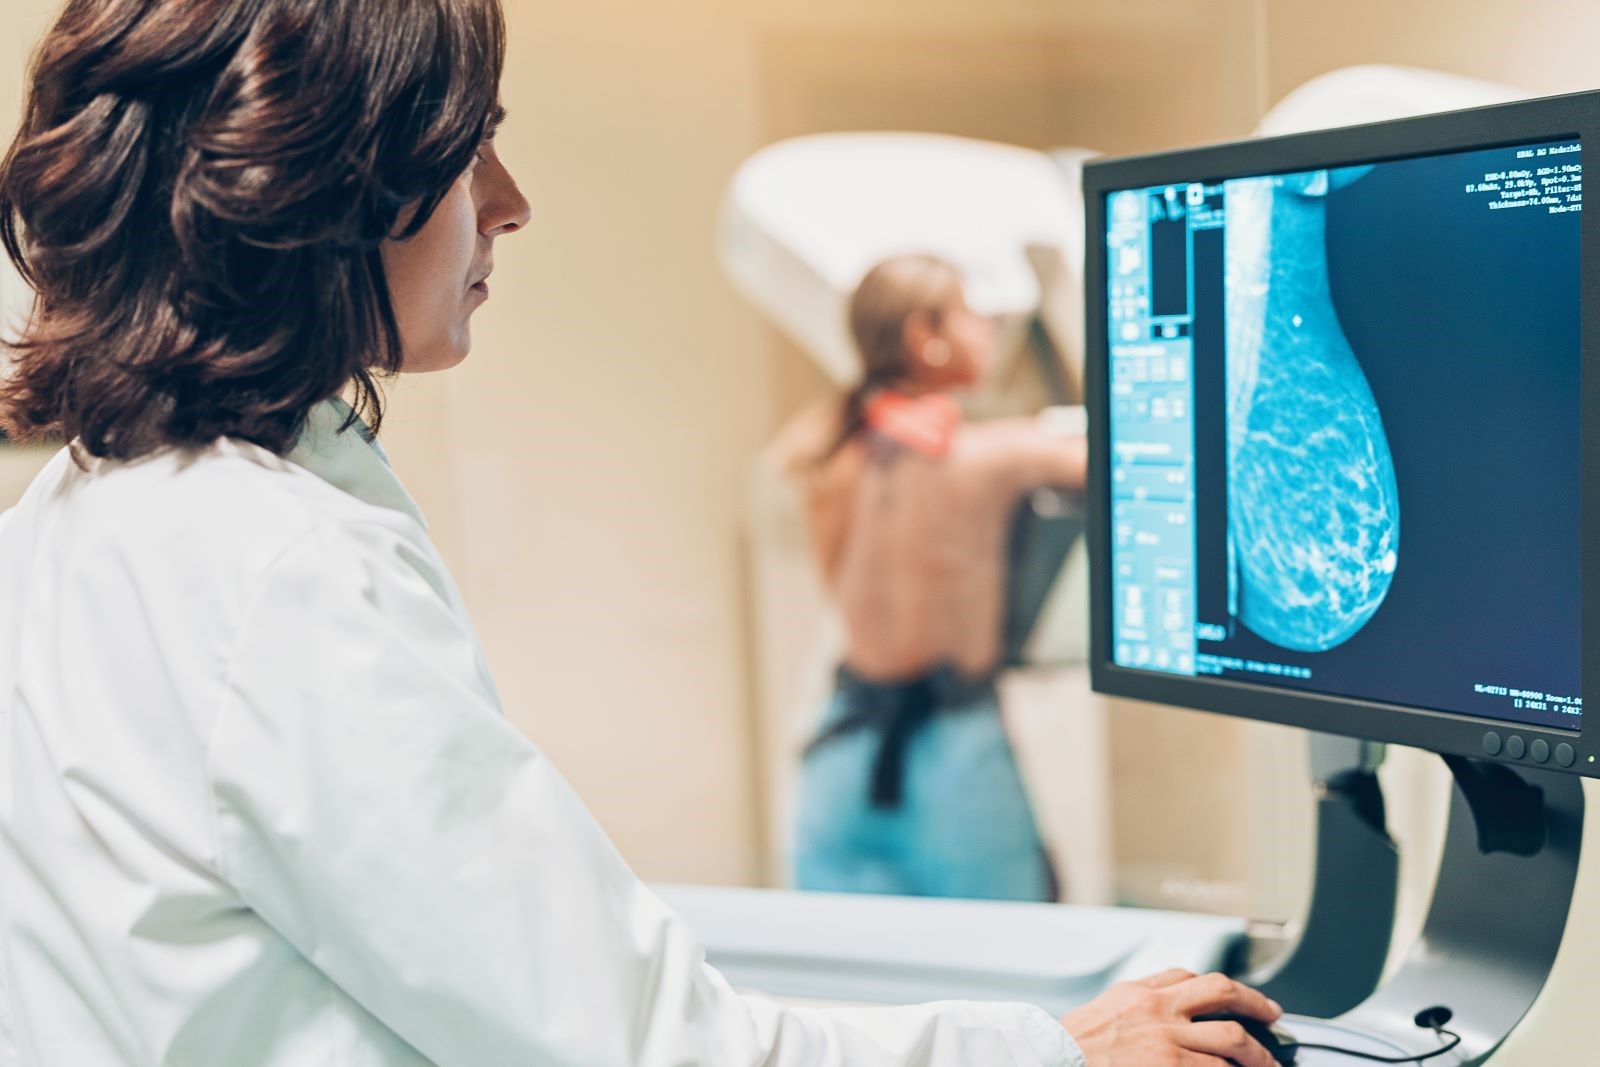 How an Annual Mammogram May Have Saved a Woman's Life